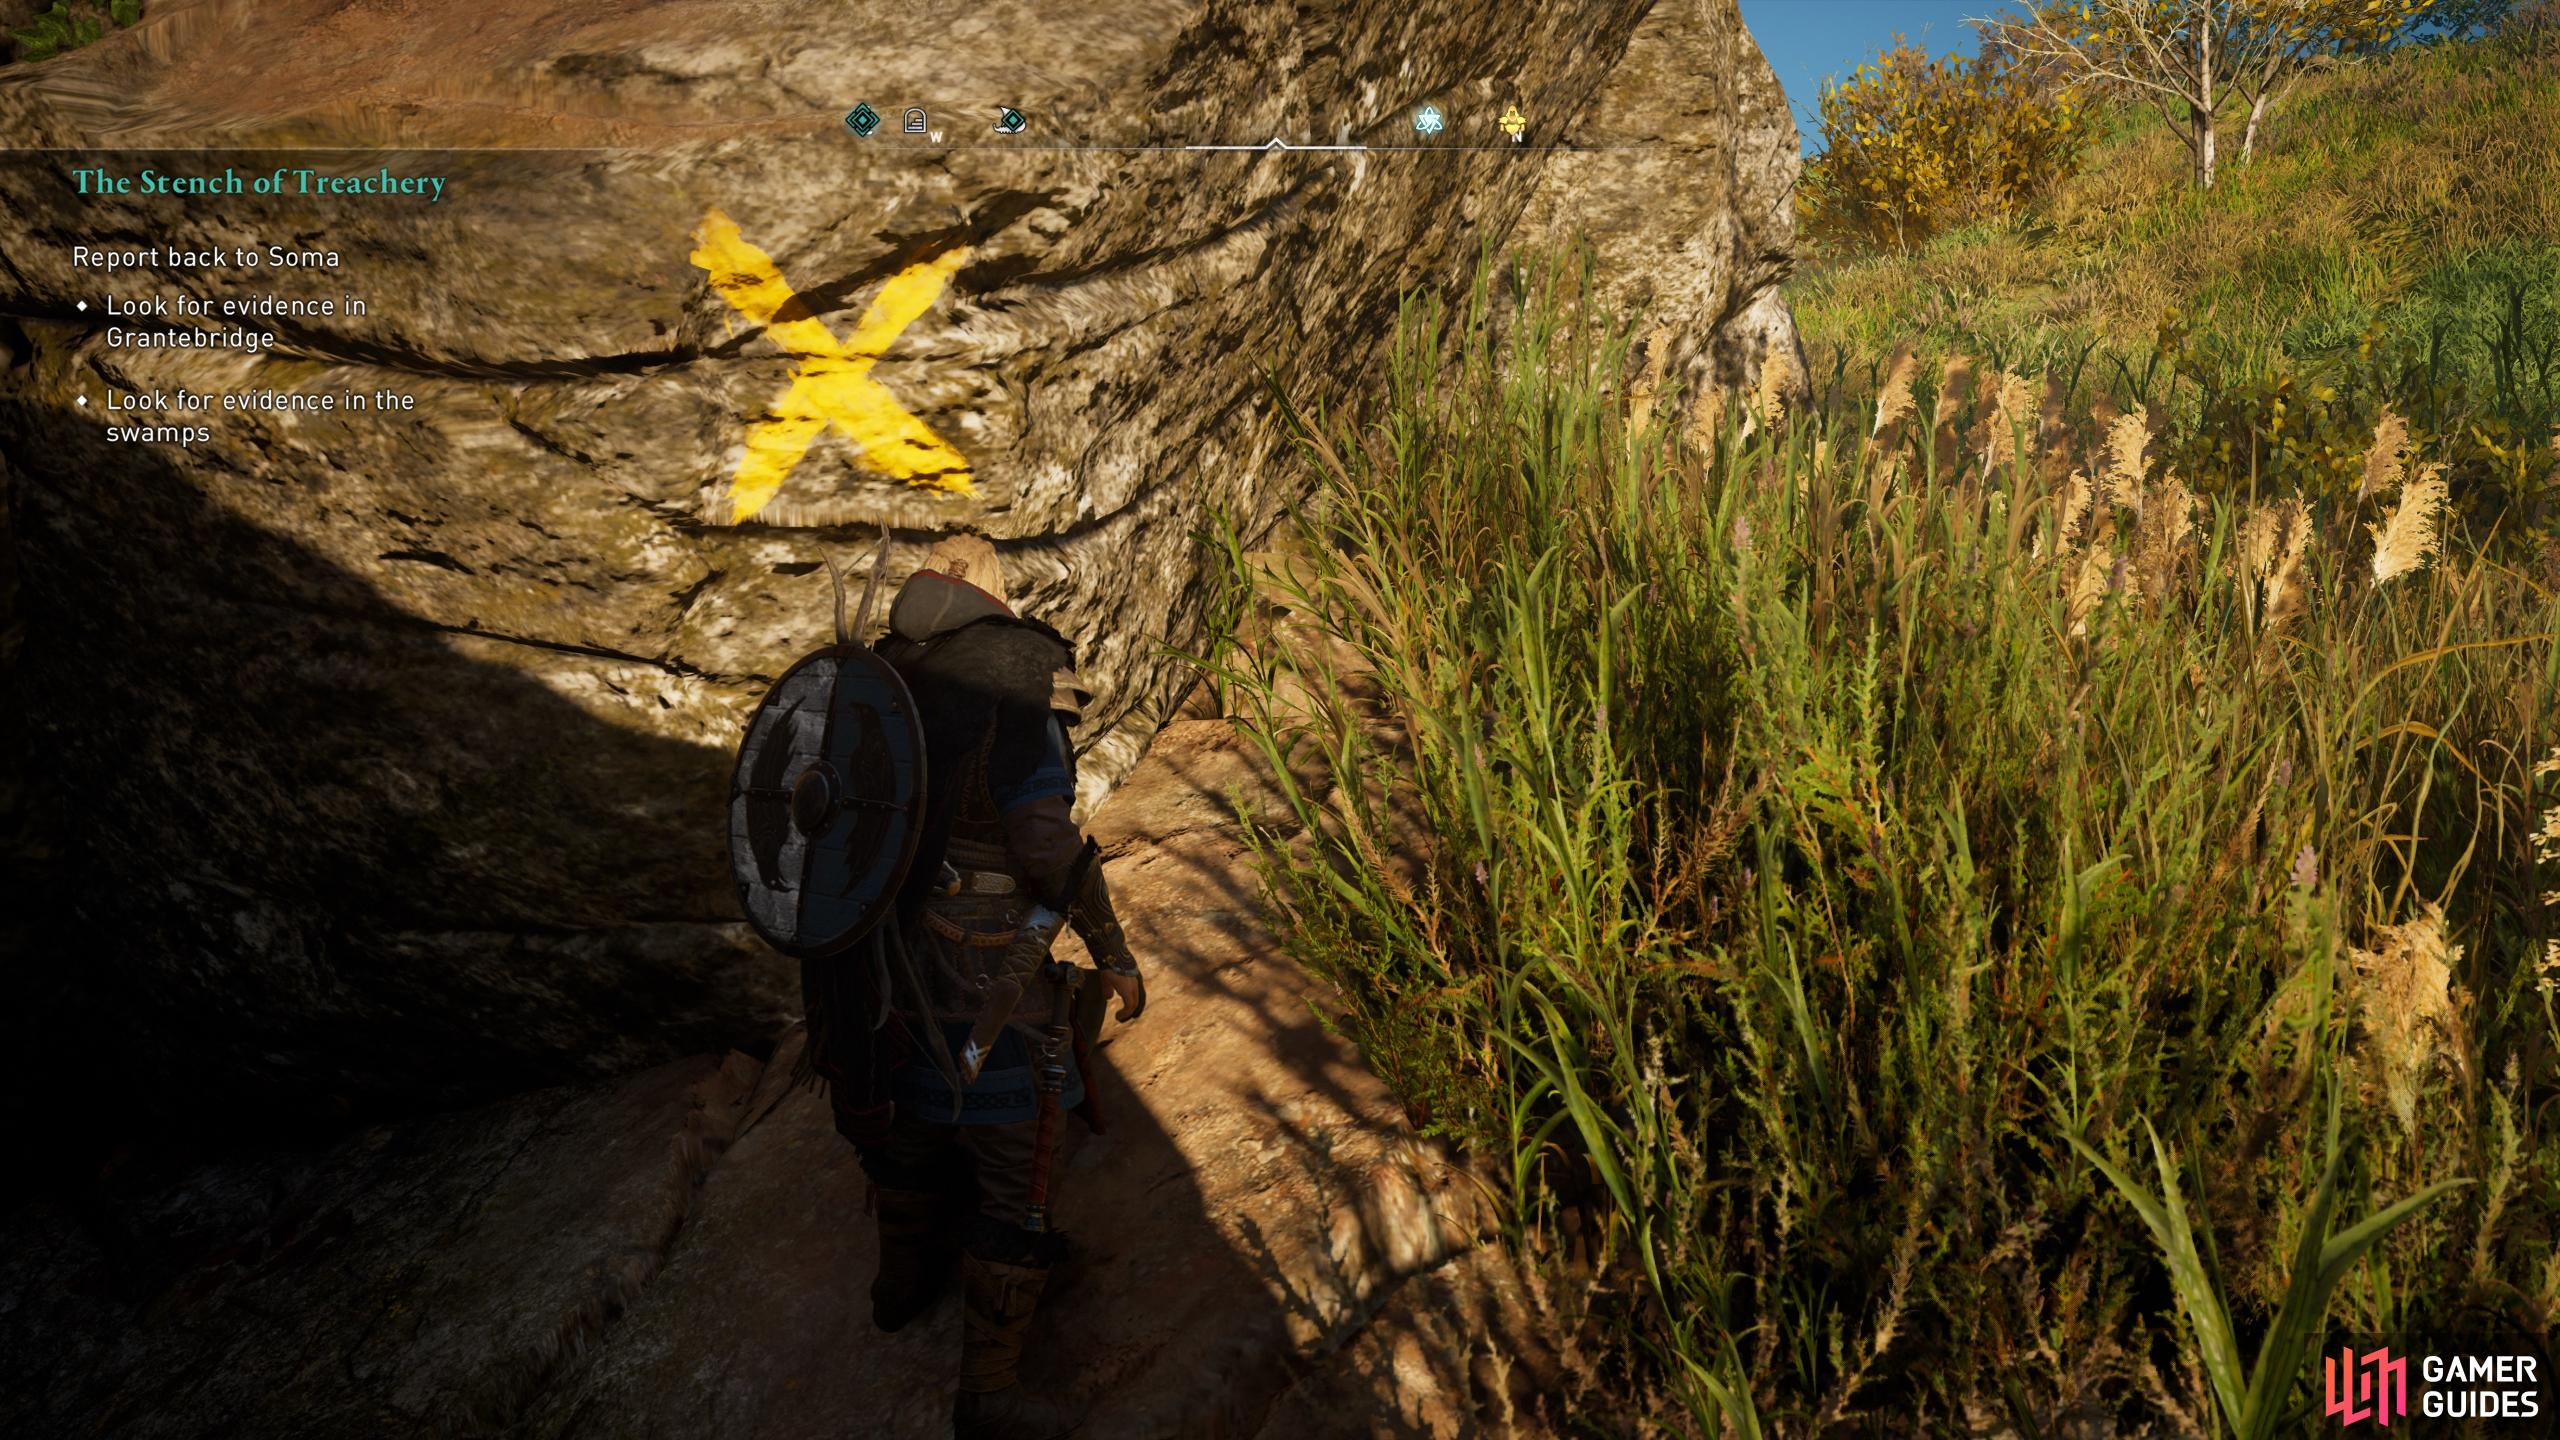 At the end of the tunnel system you will find a yellow paint marking on the rock face.